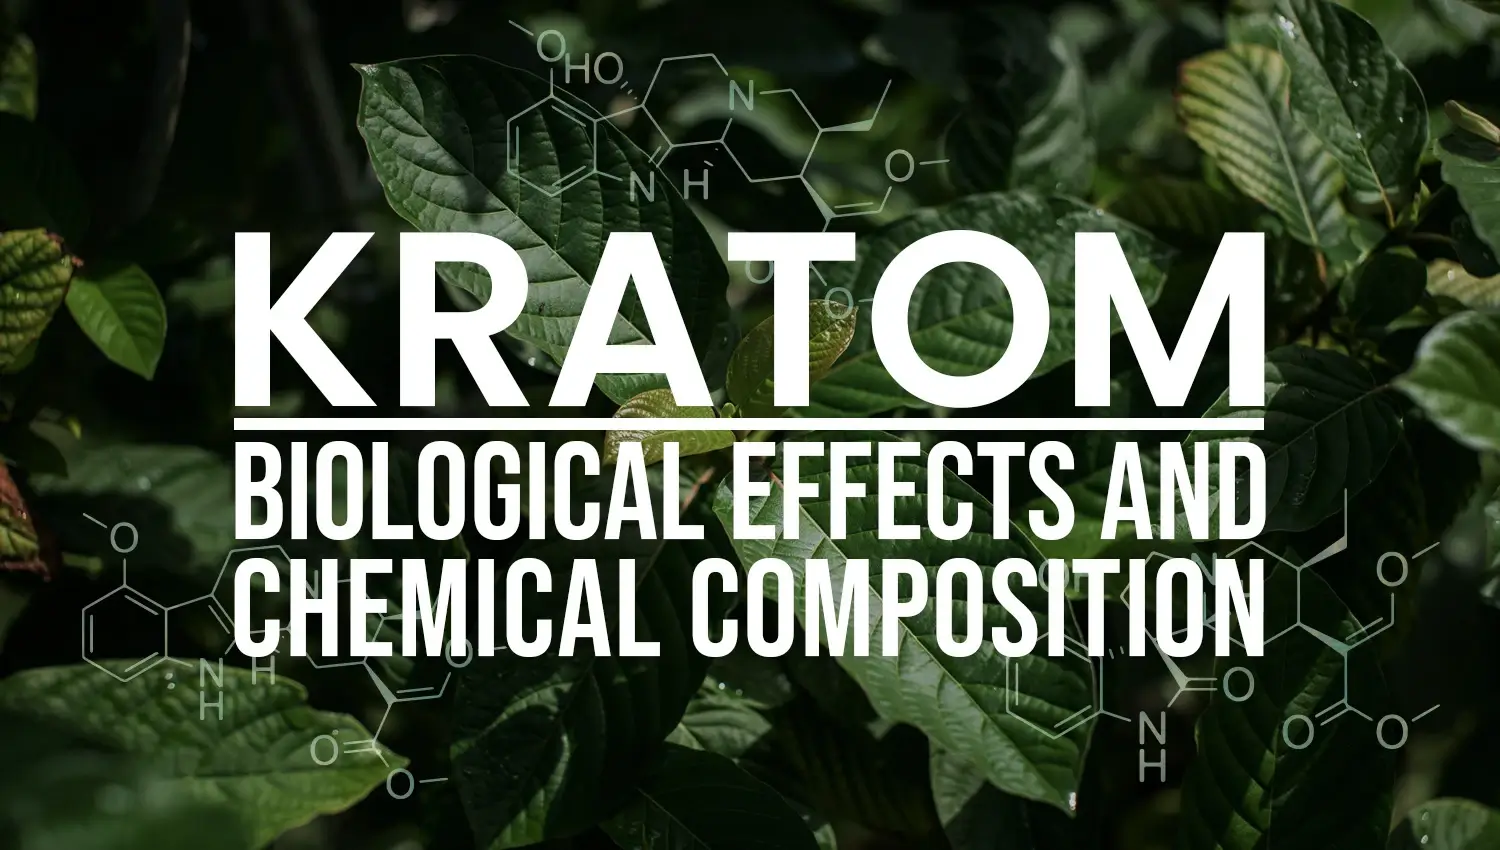 Kratom - Biological Effects and Chemical Composition